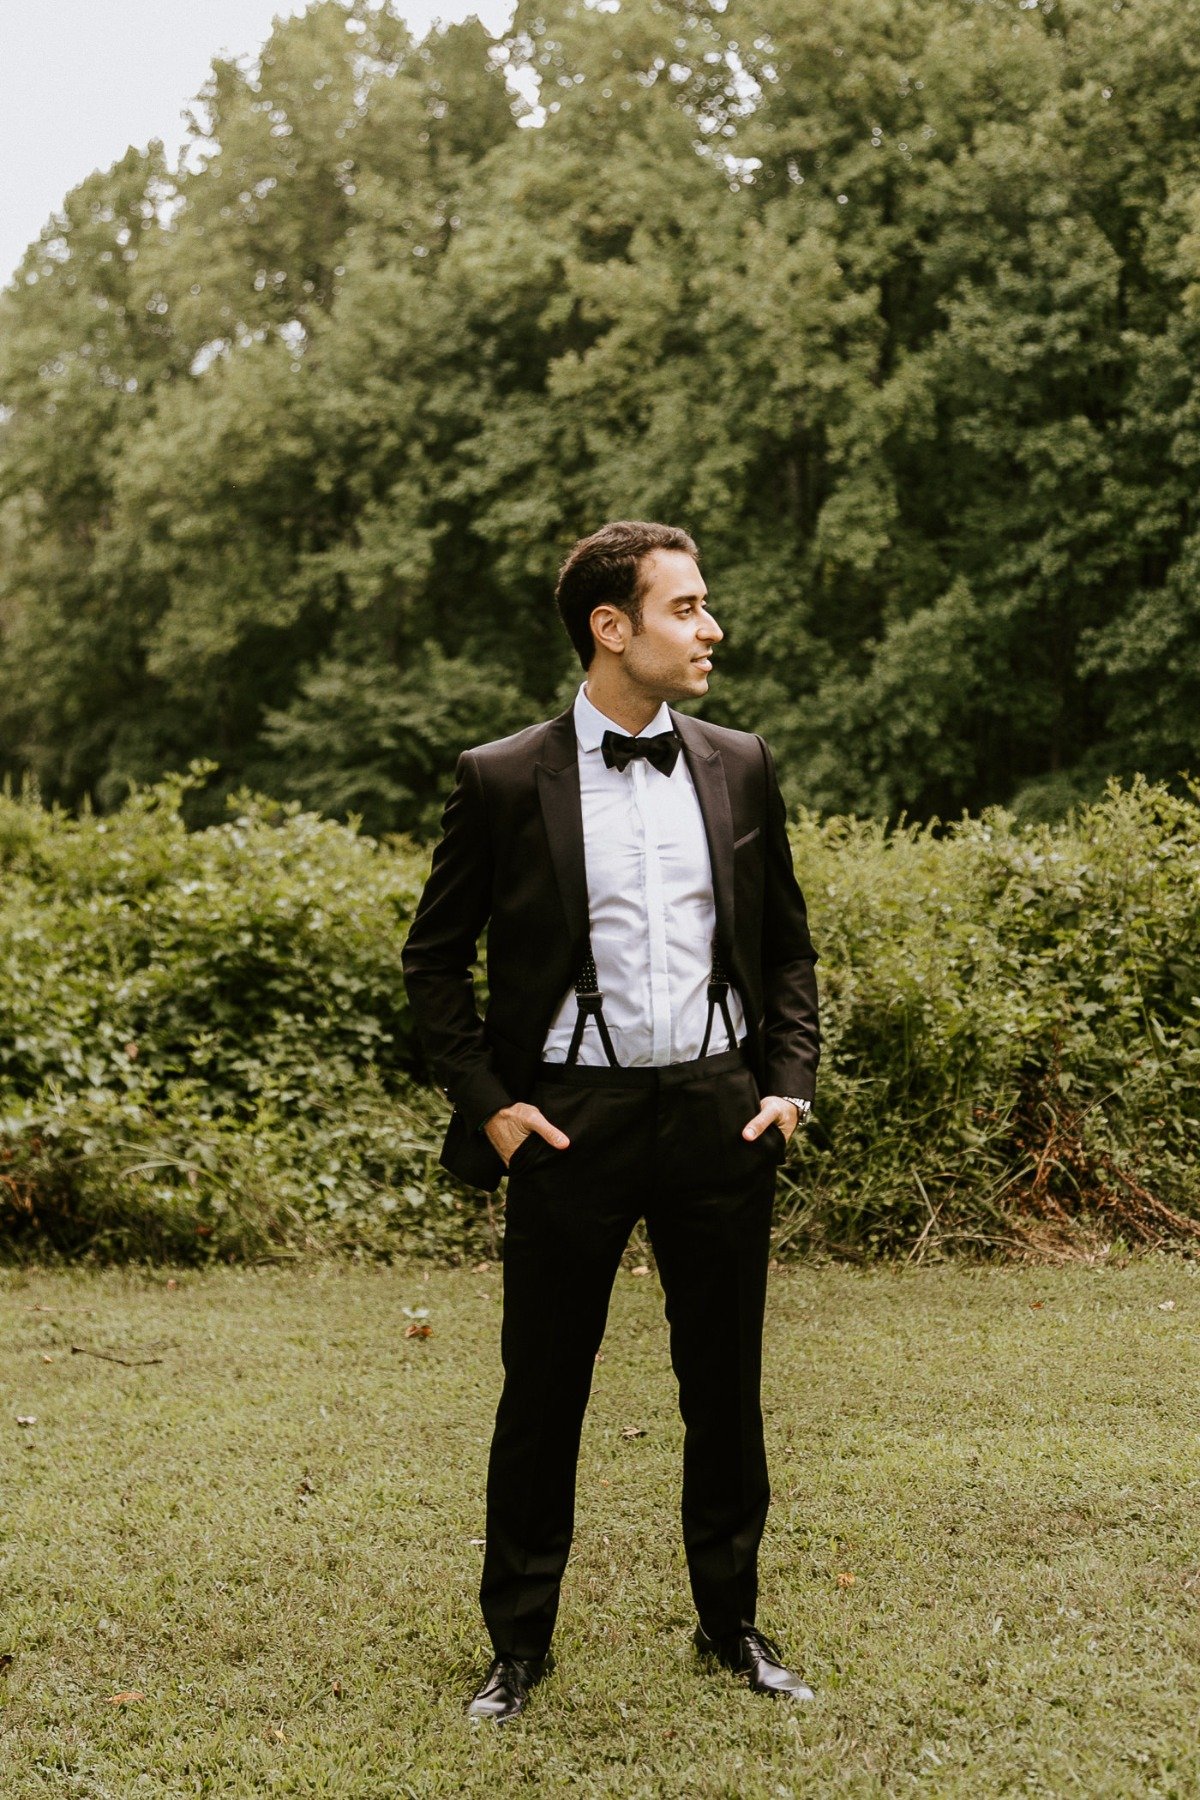 Groom outfit ideas - Black Tux with suspender